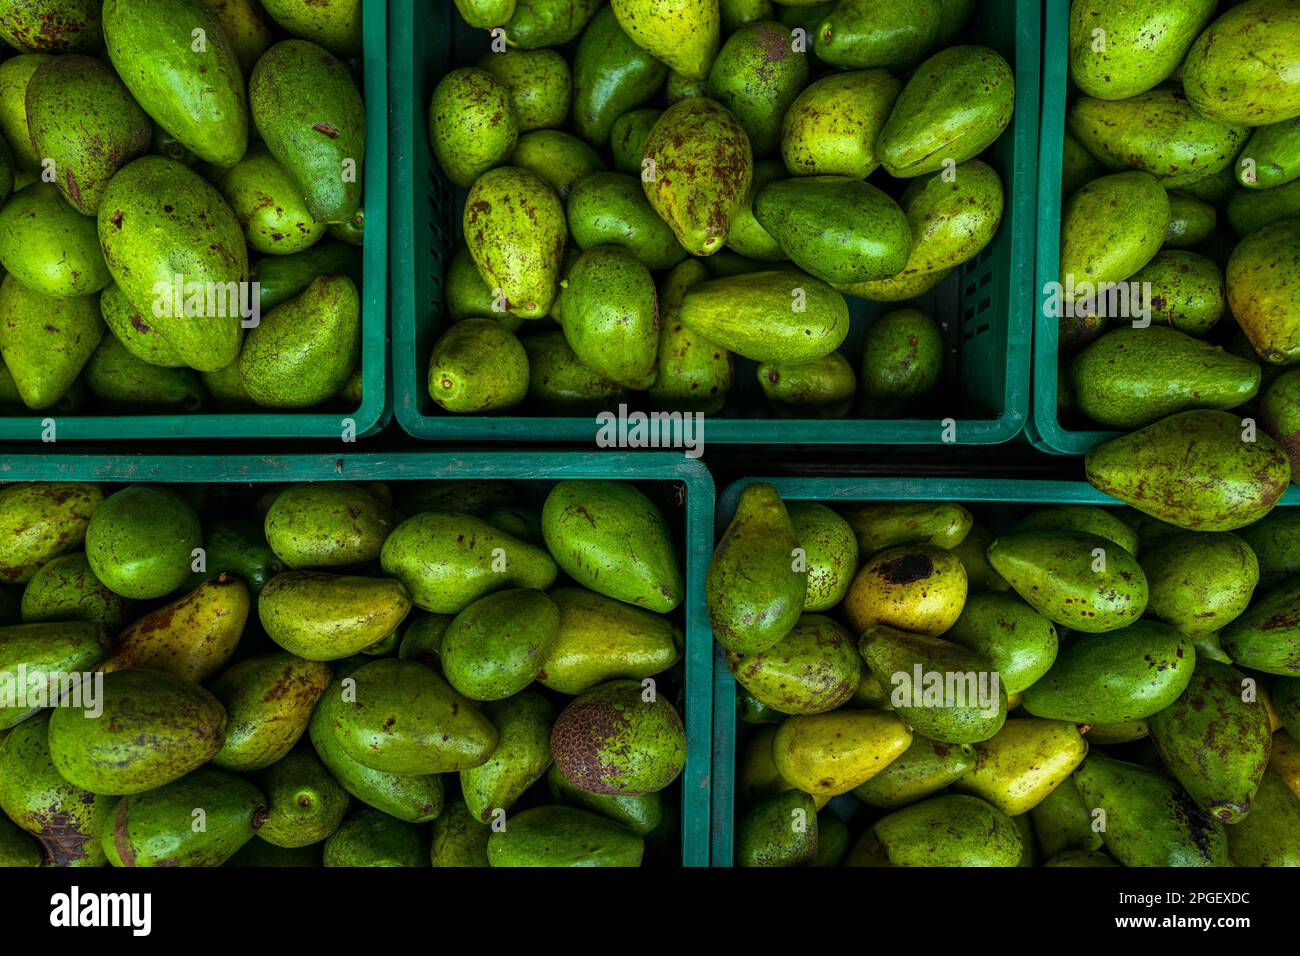 Plastic crates of fresh avocados, cultivated in local farms, are seen offered for sale in the street market in Cali, Colombia. Stock Photo